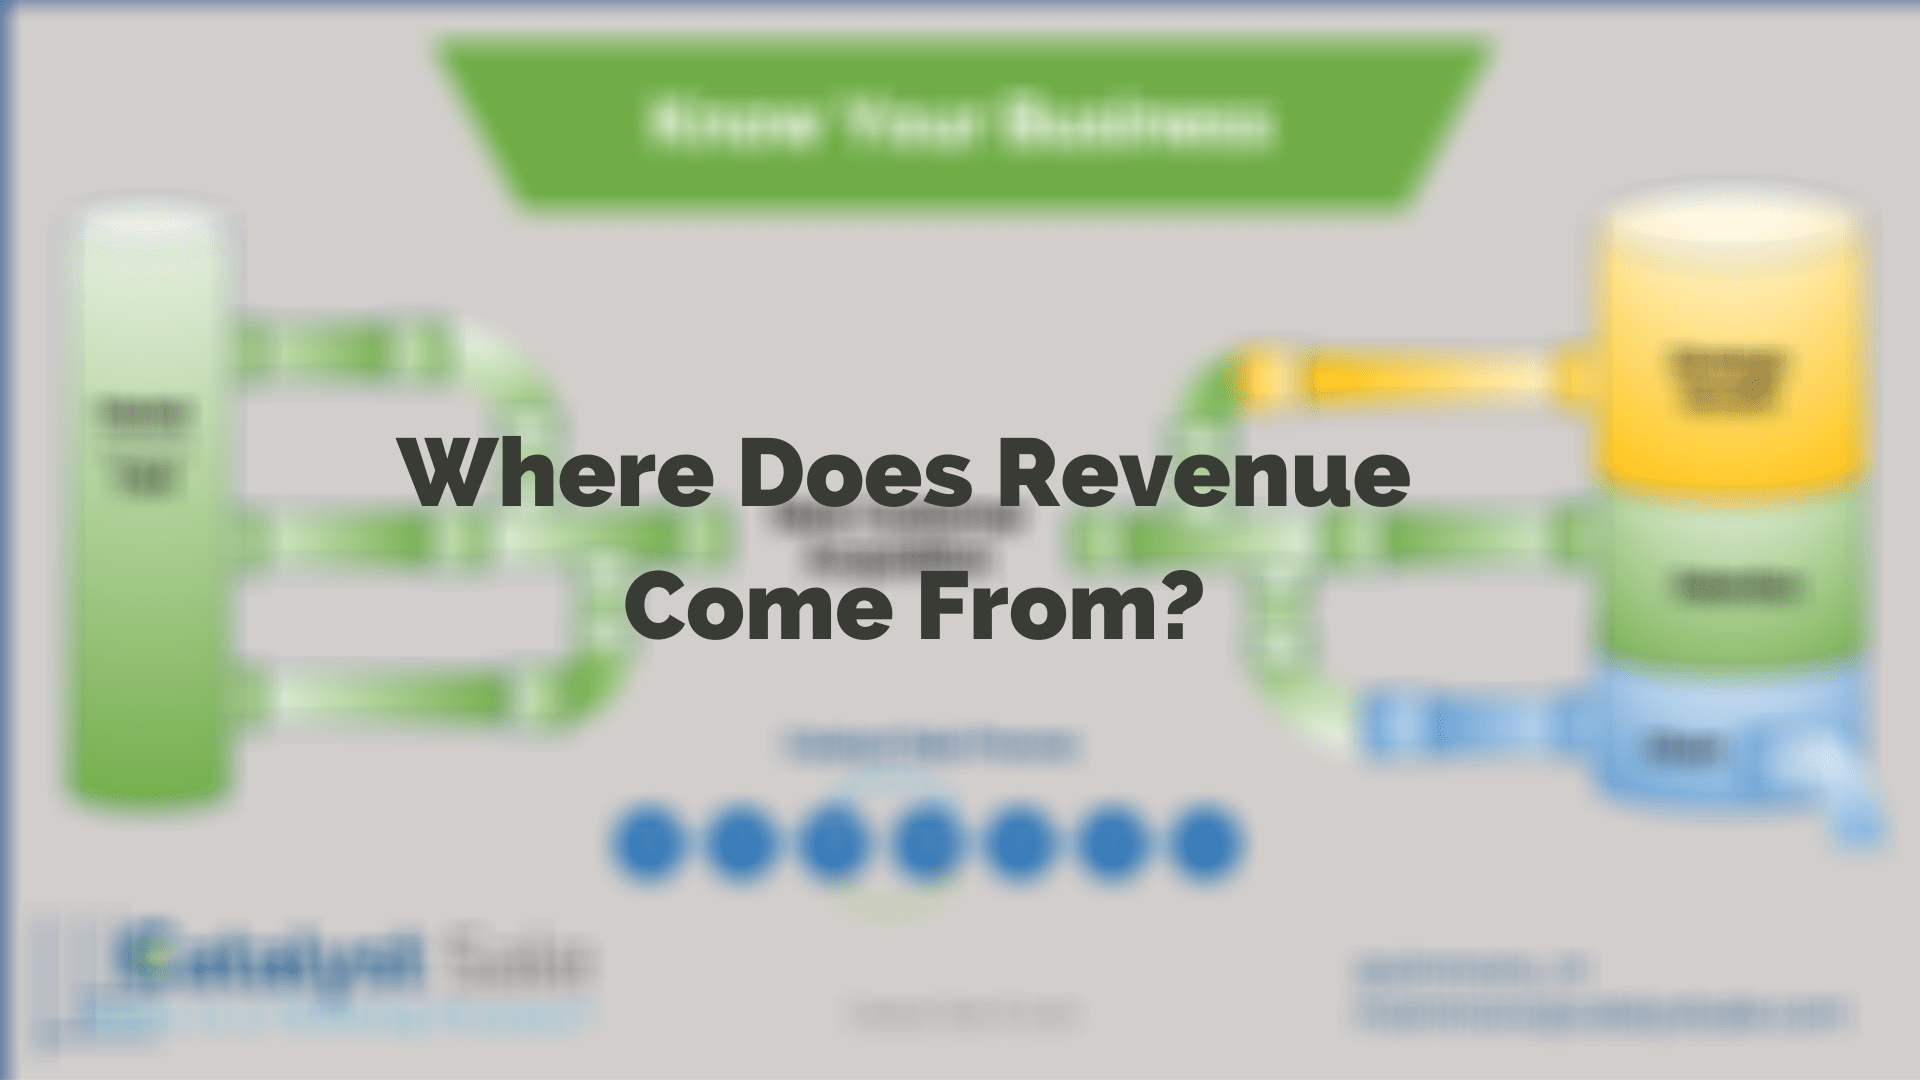 Revenue - Where Does It Come From?